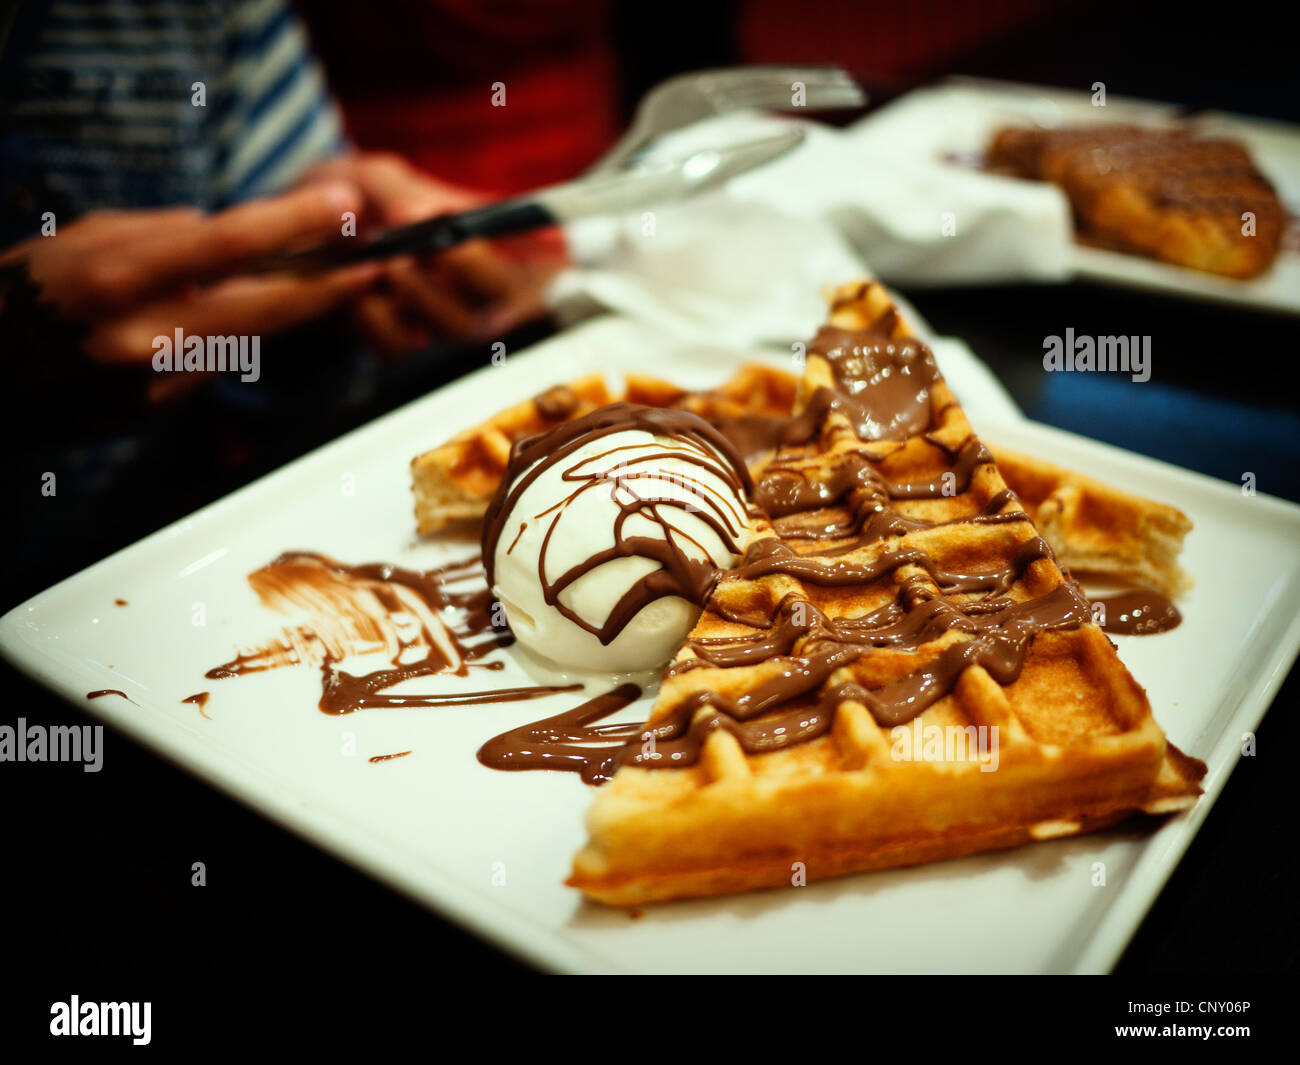 Halfway through waffles with icecream and choclate sauce Stock Photo